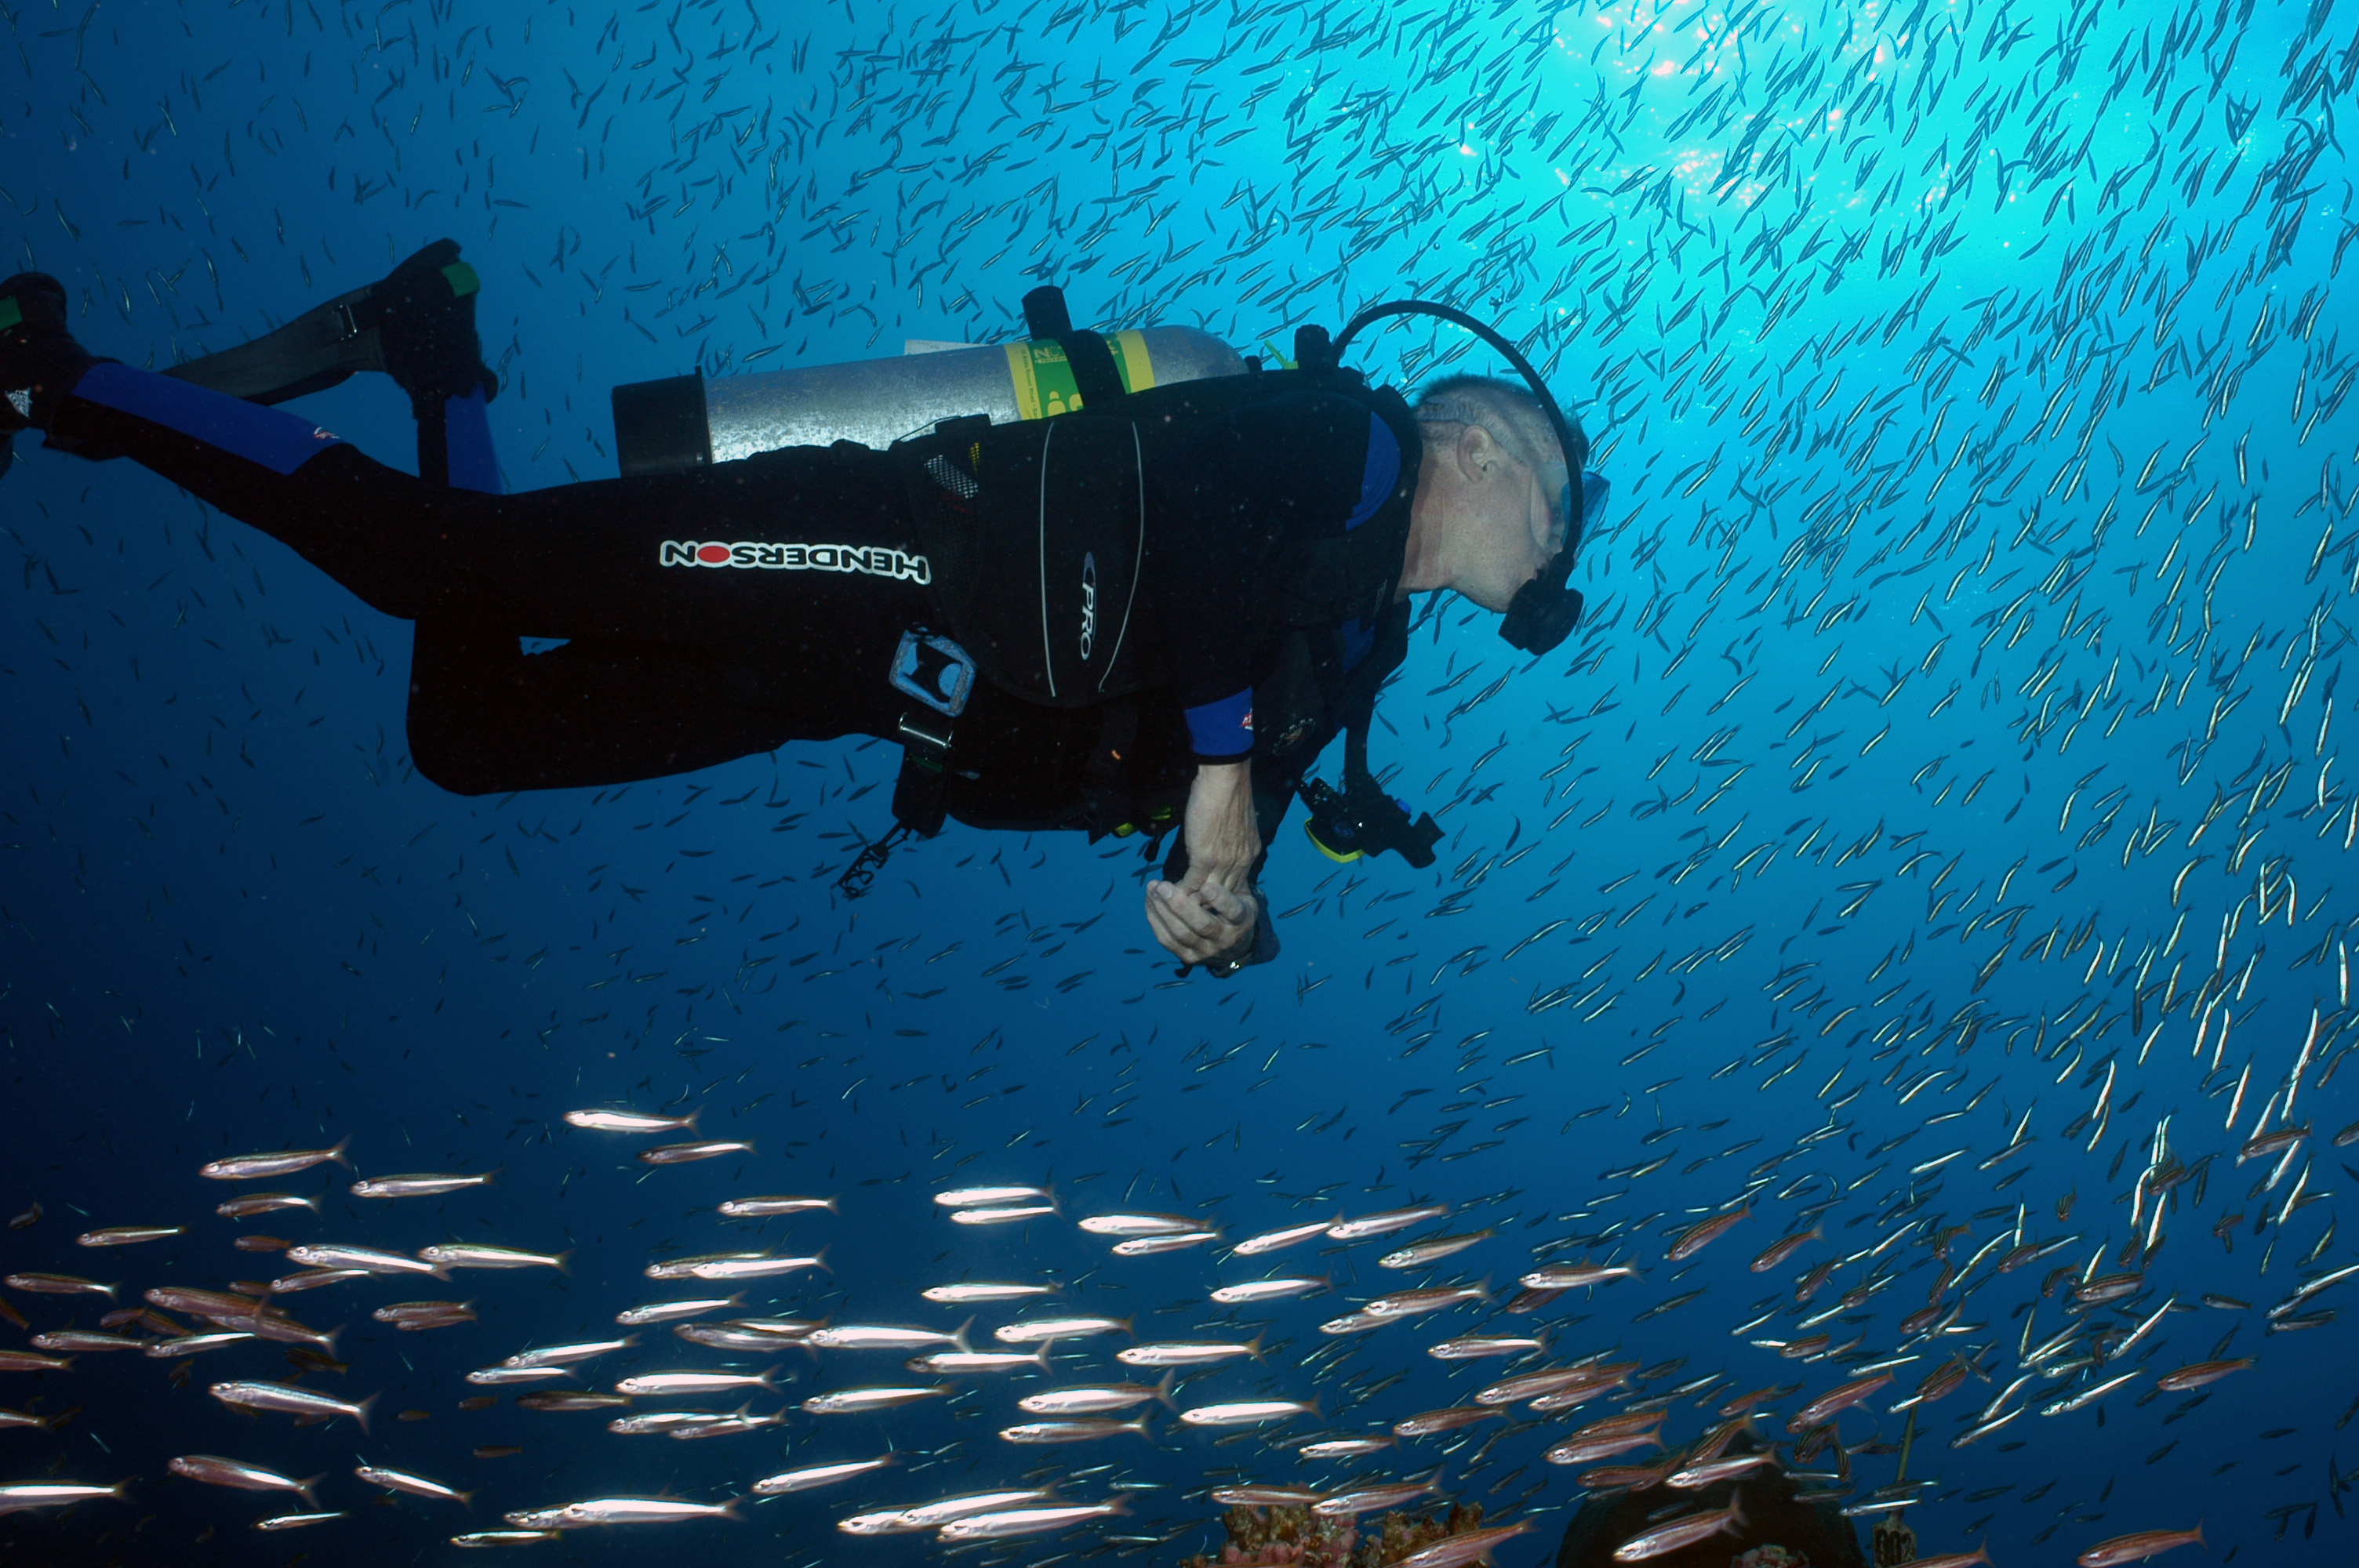 A scuba diver swims amid a school of fish at Flower Garden Banks National Marine Sanctuary.